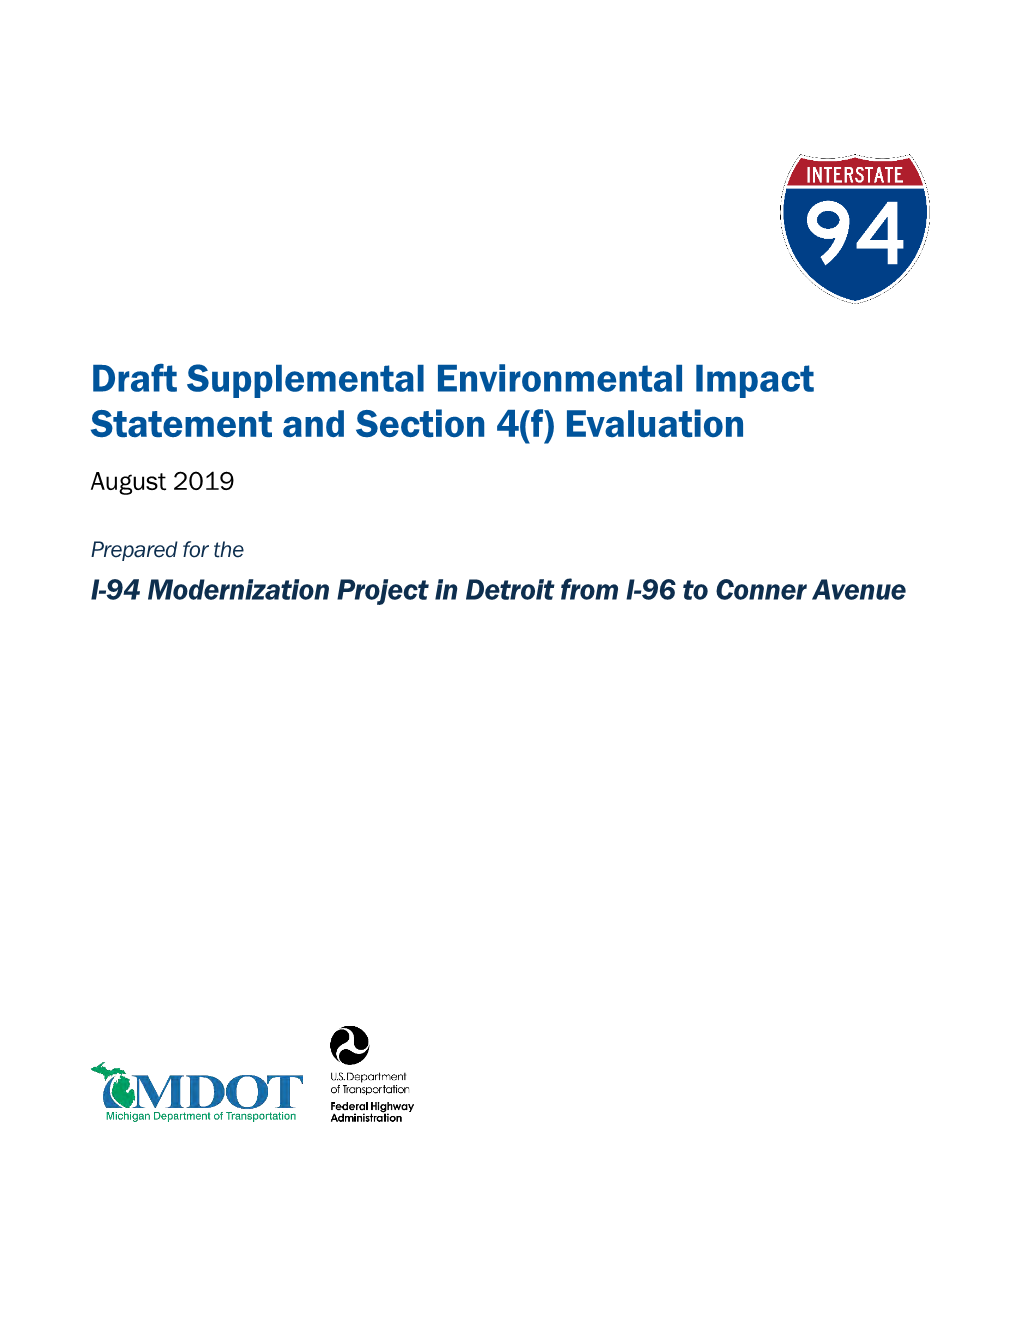 Draft Supplemental Environmental Impact Statement and Section 4(F) Evaluation August 2019